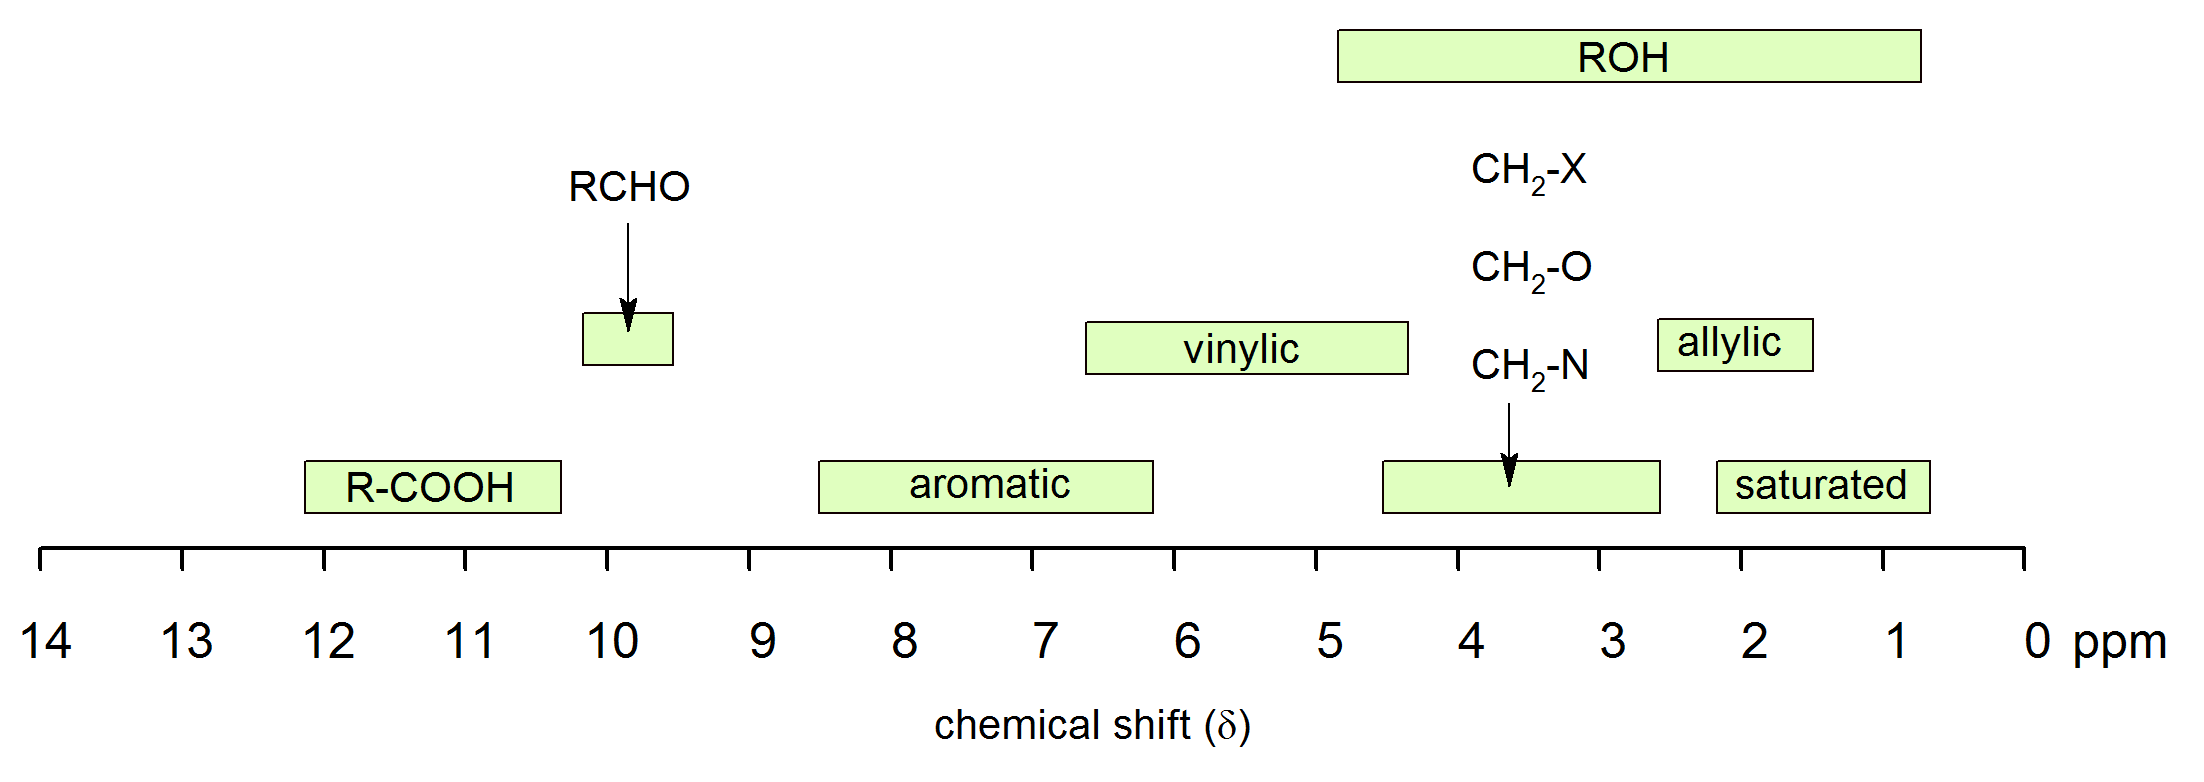 A figure showing chemical shifts for proton NMR of functional groups. For more details see infographic above with text description.